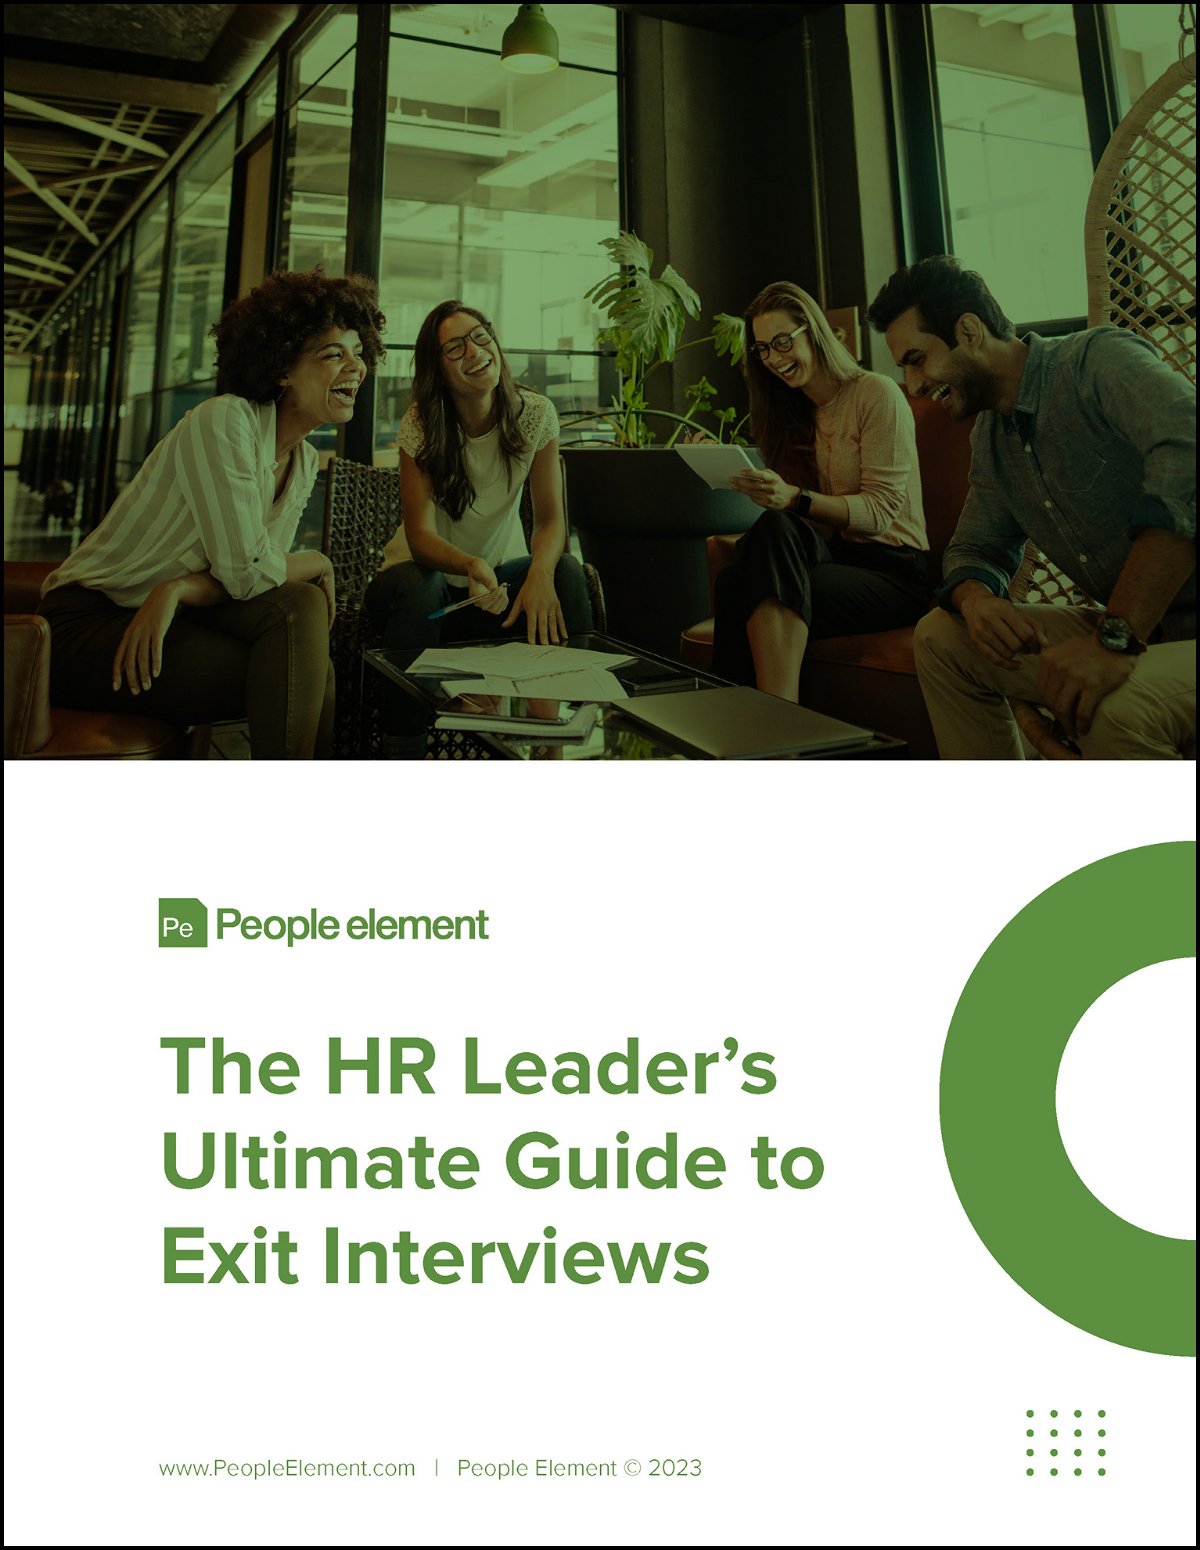 The Ultimate Guide to Exit Interviews